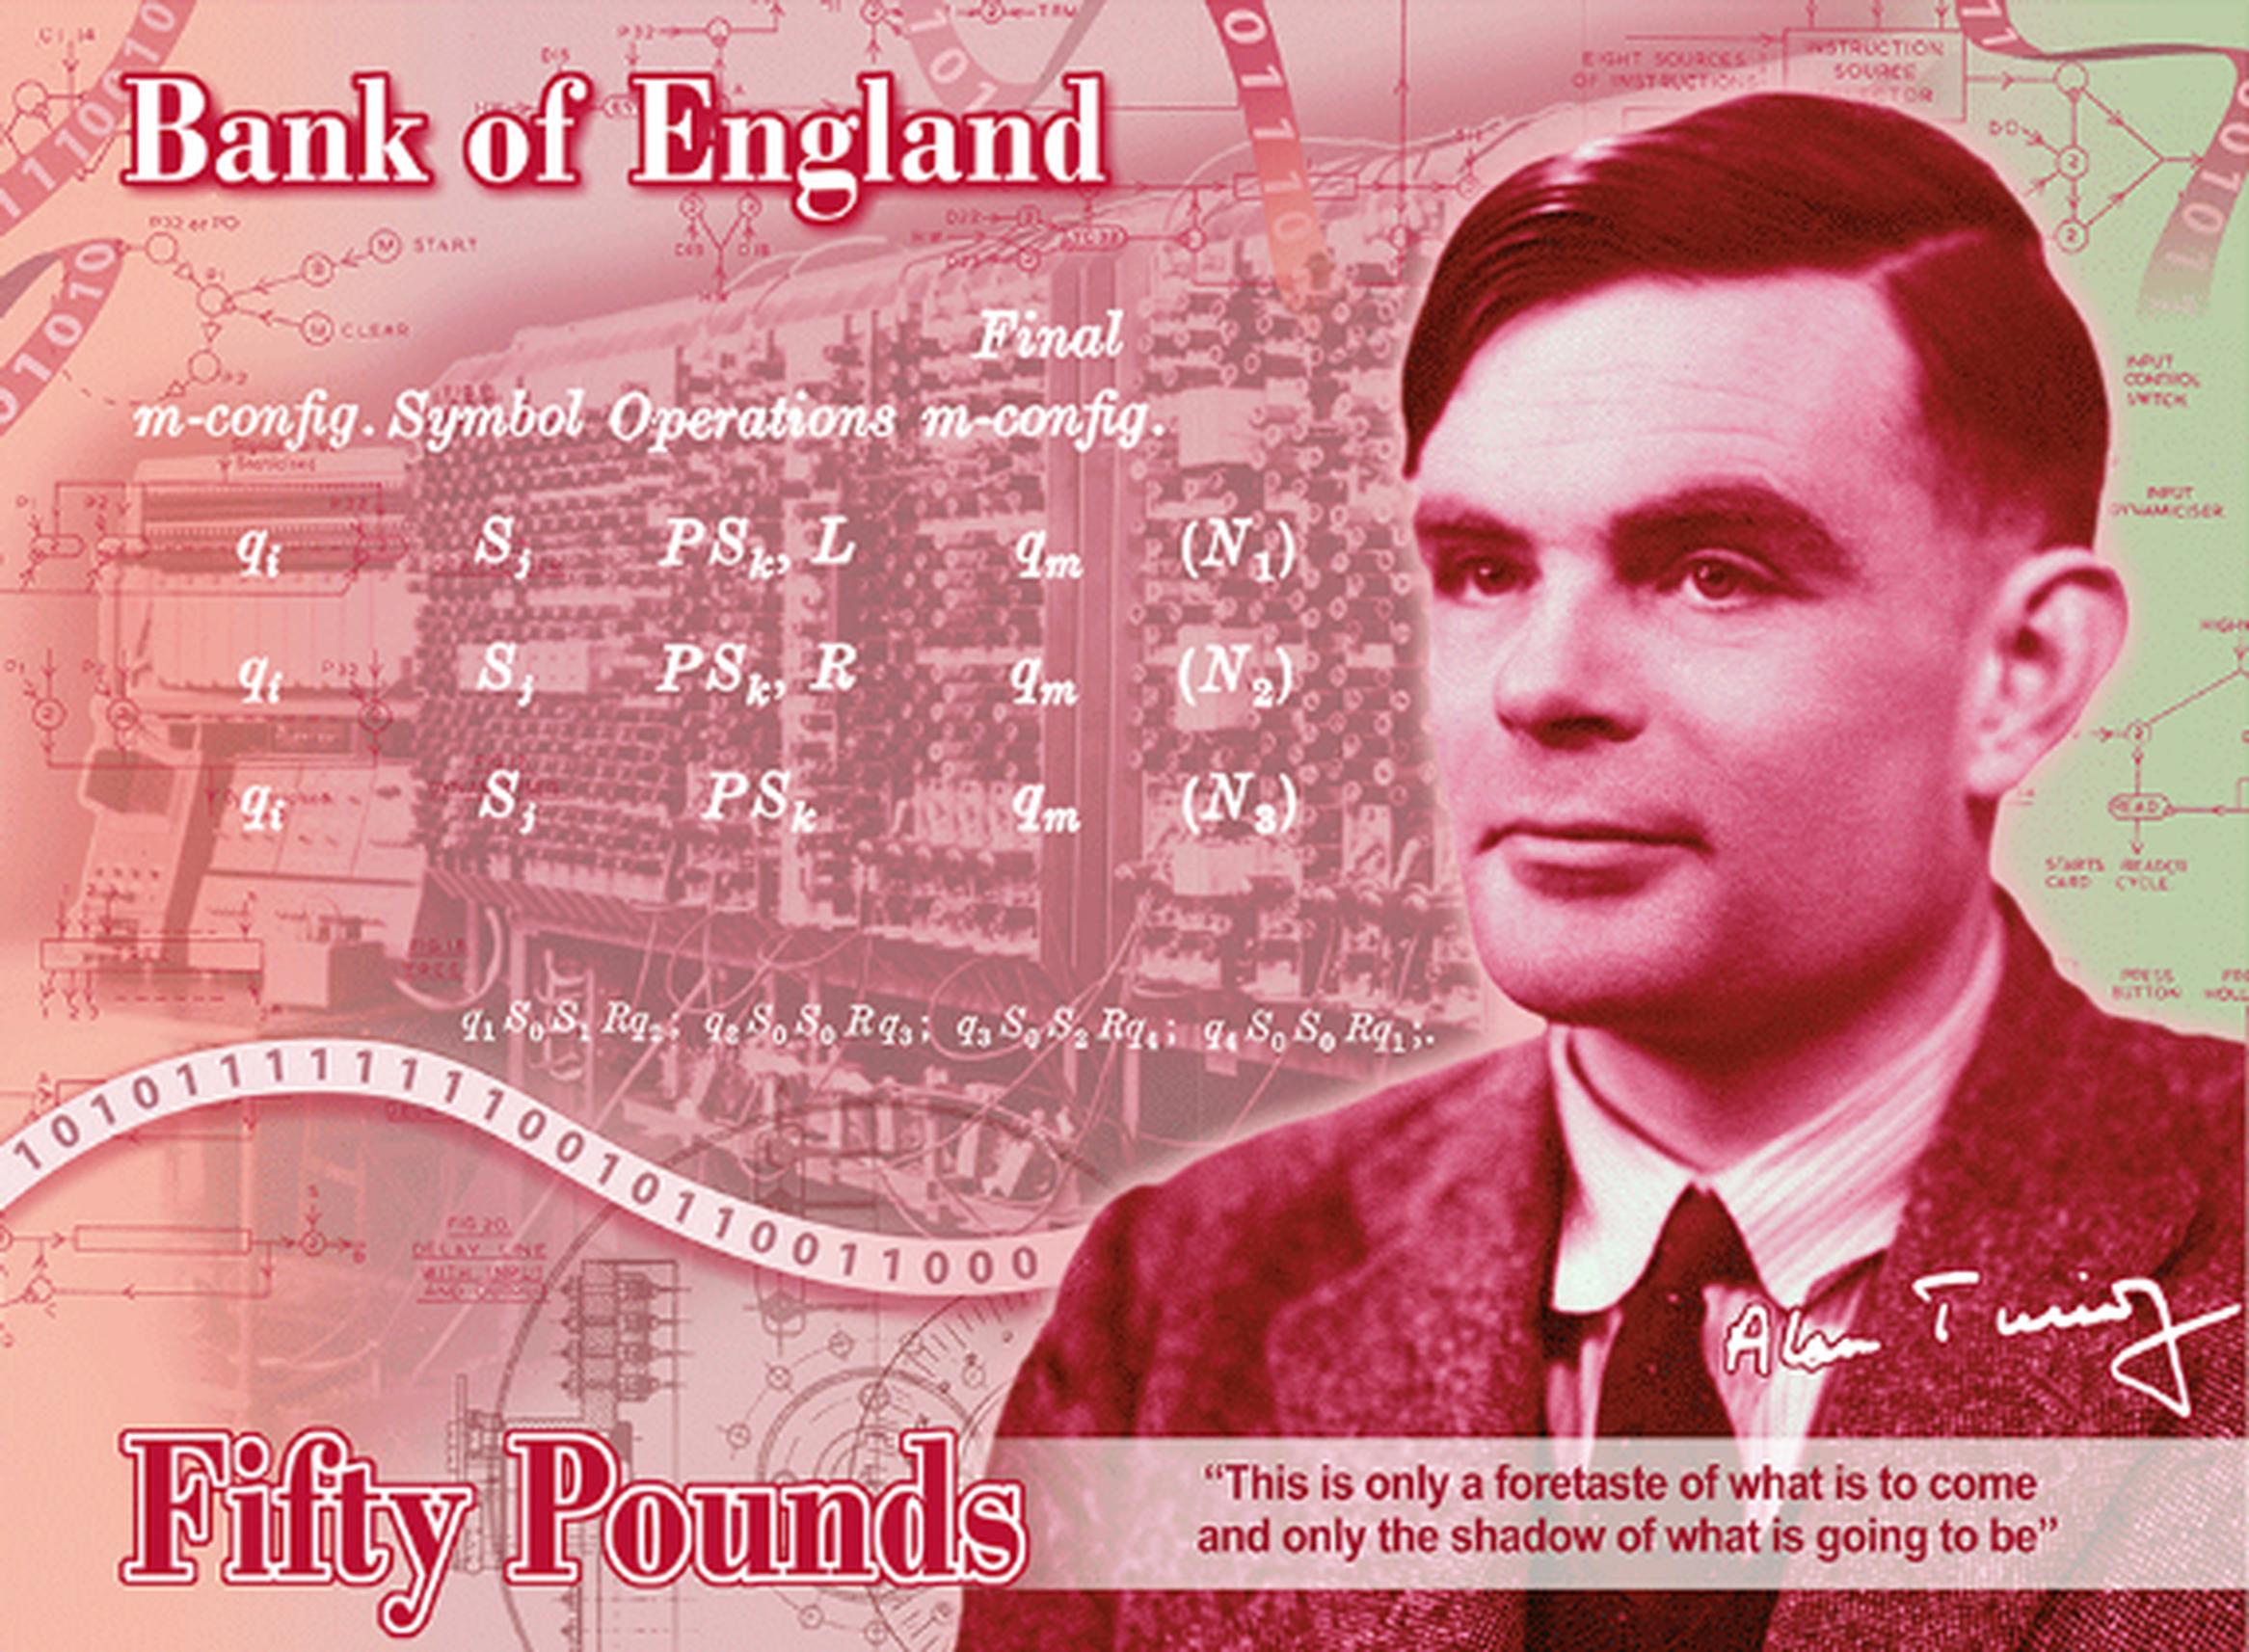 The new £50 note (Bank of England)